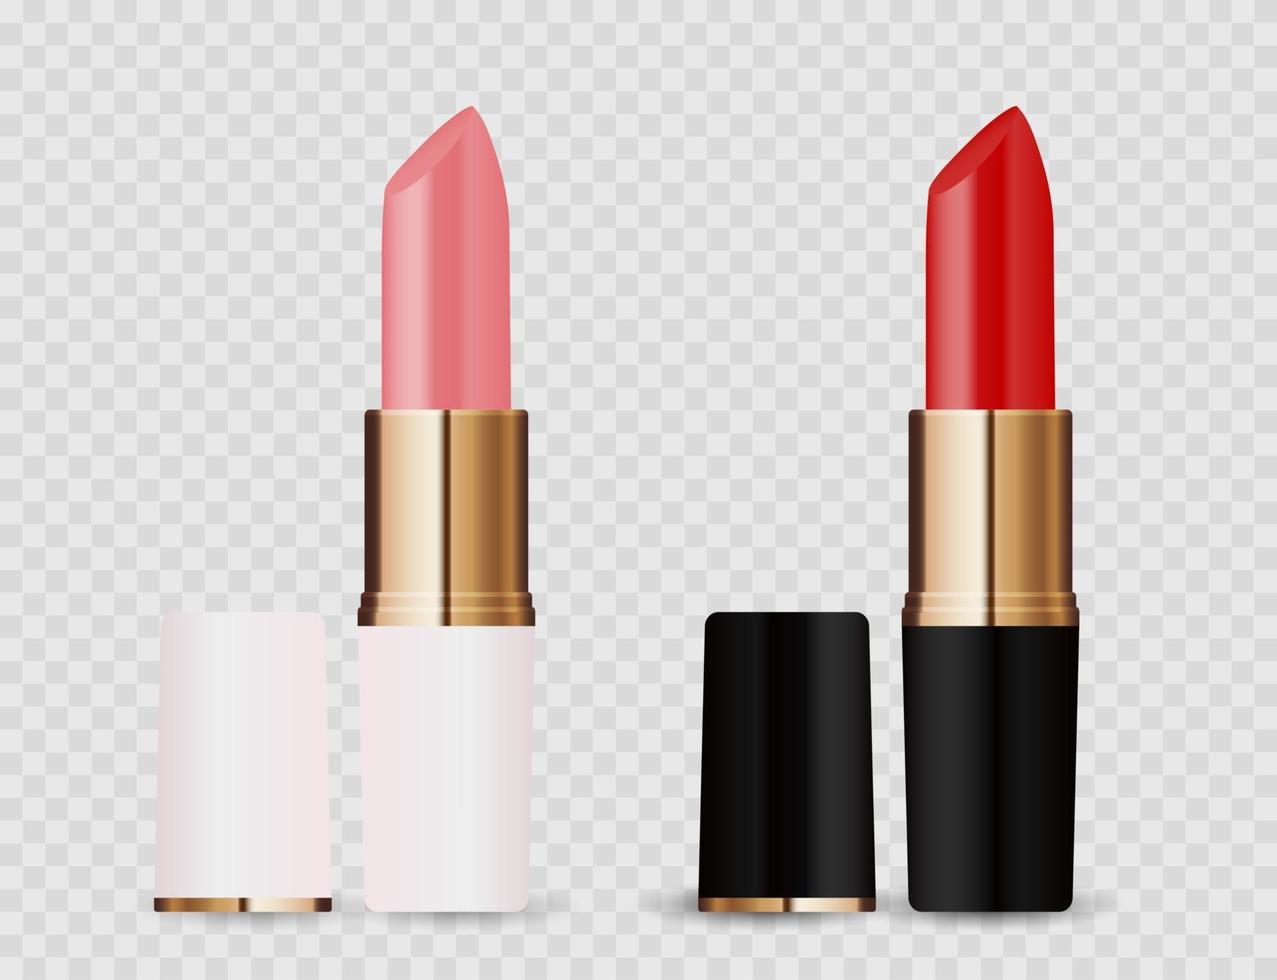 Realistic 3D light pink and red lipstick icon isolated on transparent background. Vector Illustration